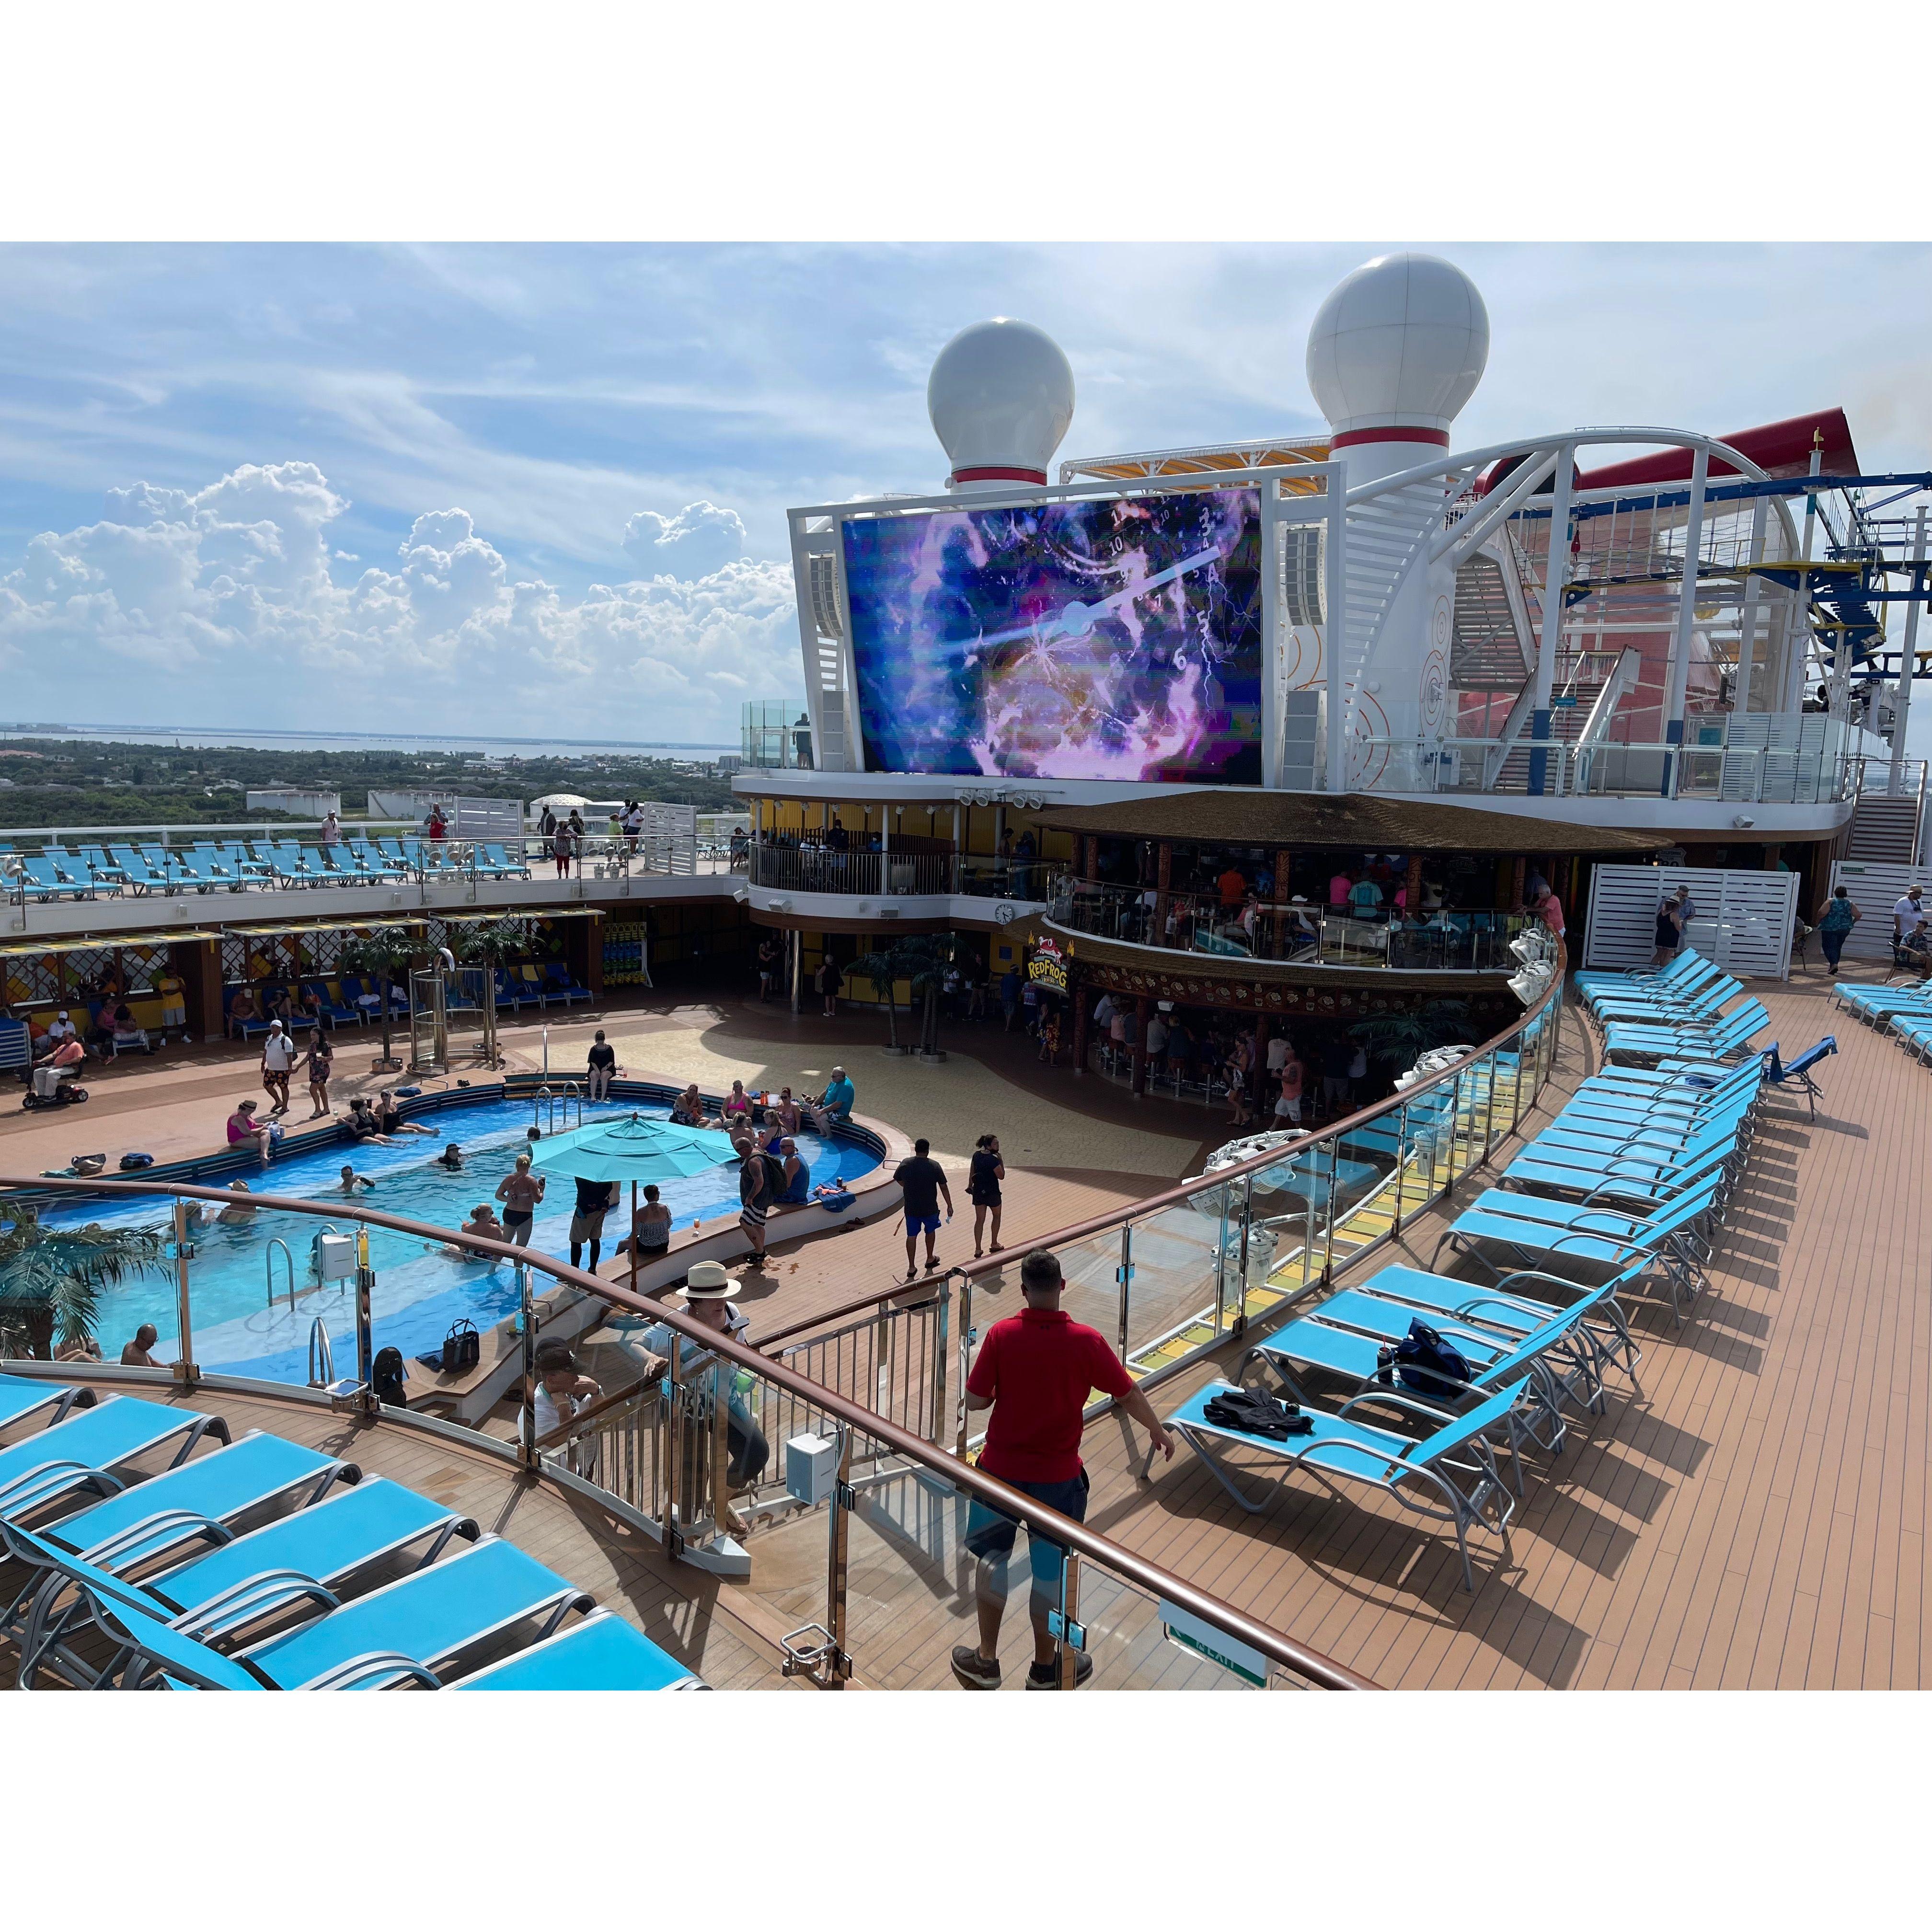 Lido Deck onboard. Recently released movies are played onboard for all to enjoy on the giant screen throughout the sailing!